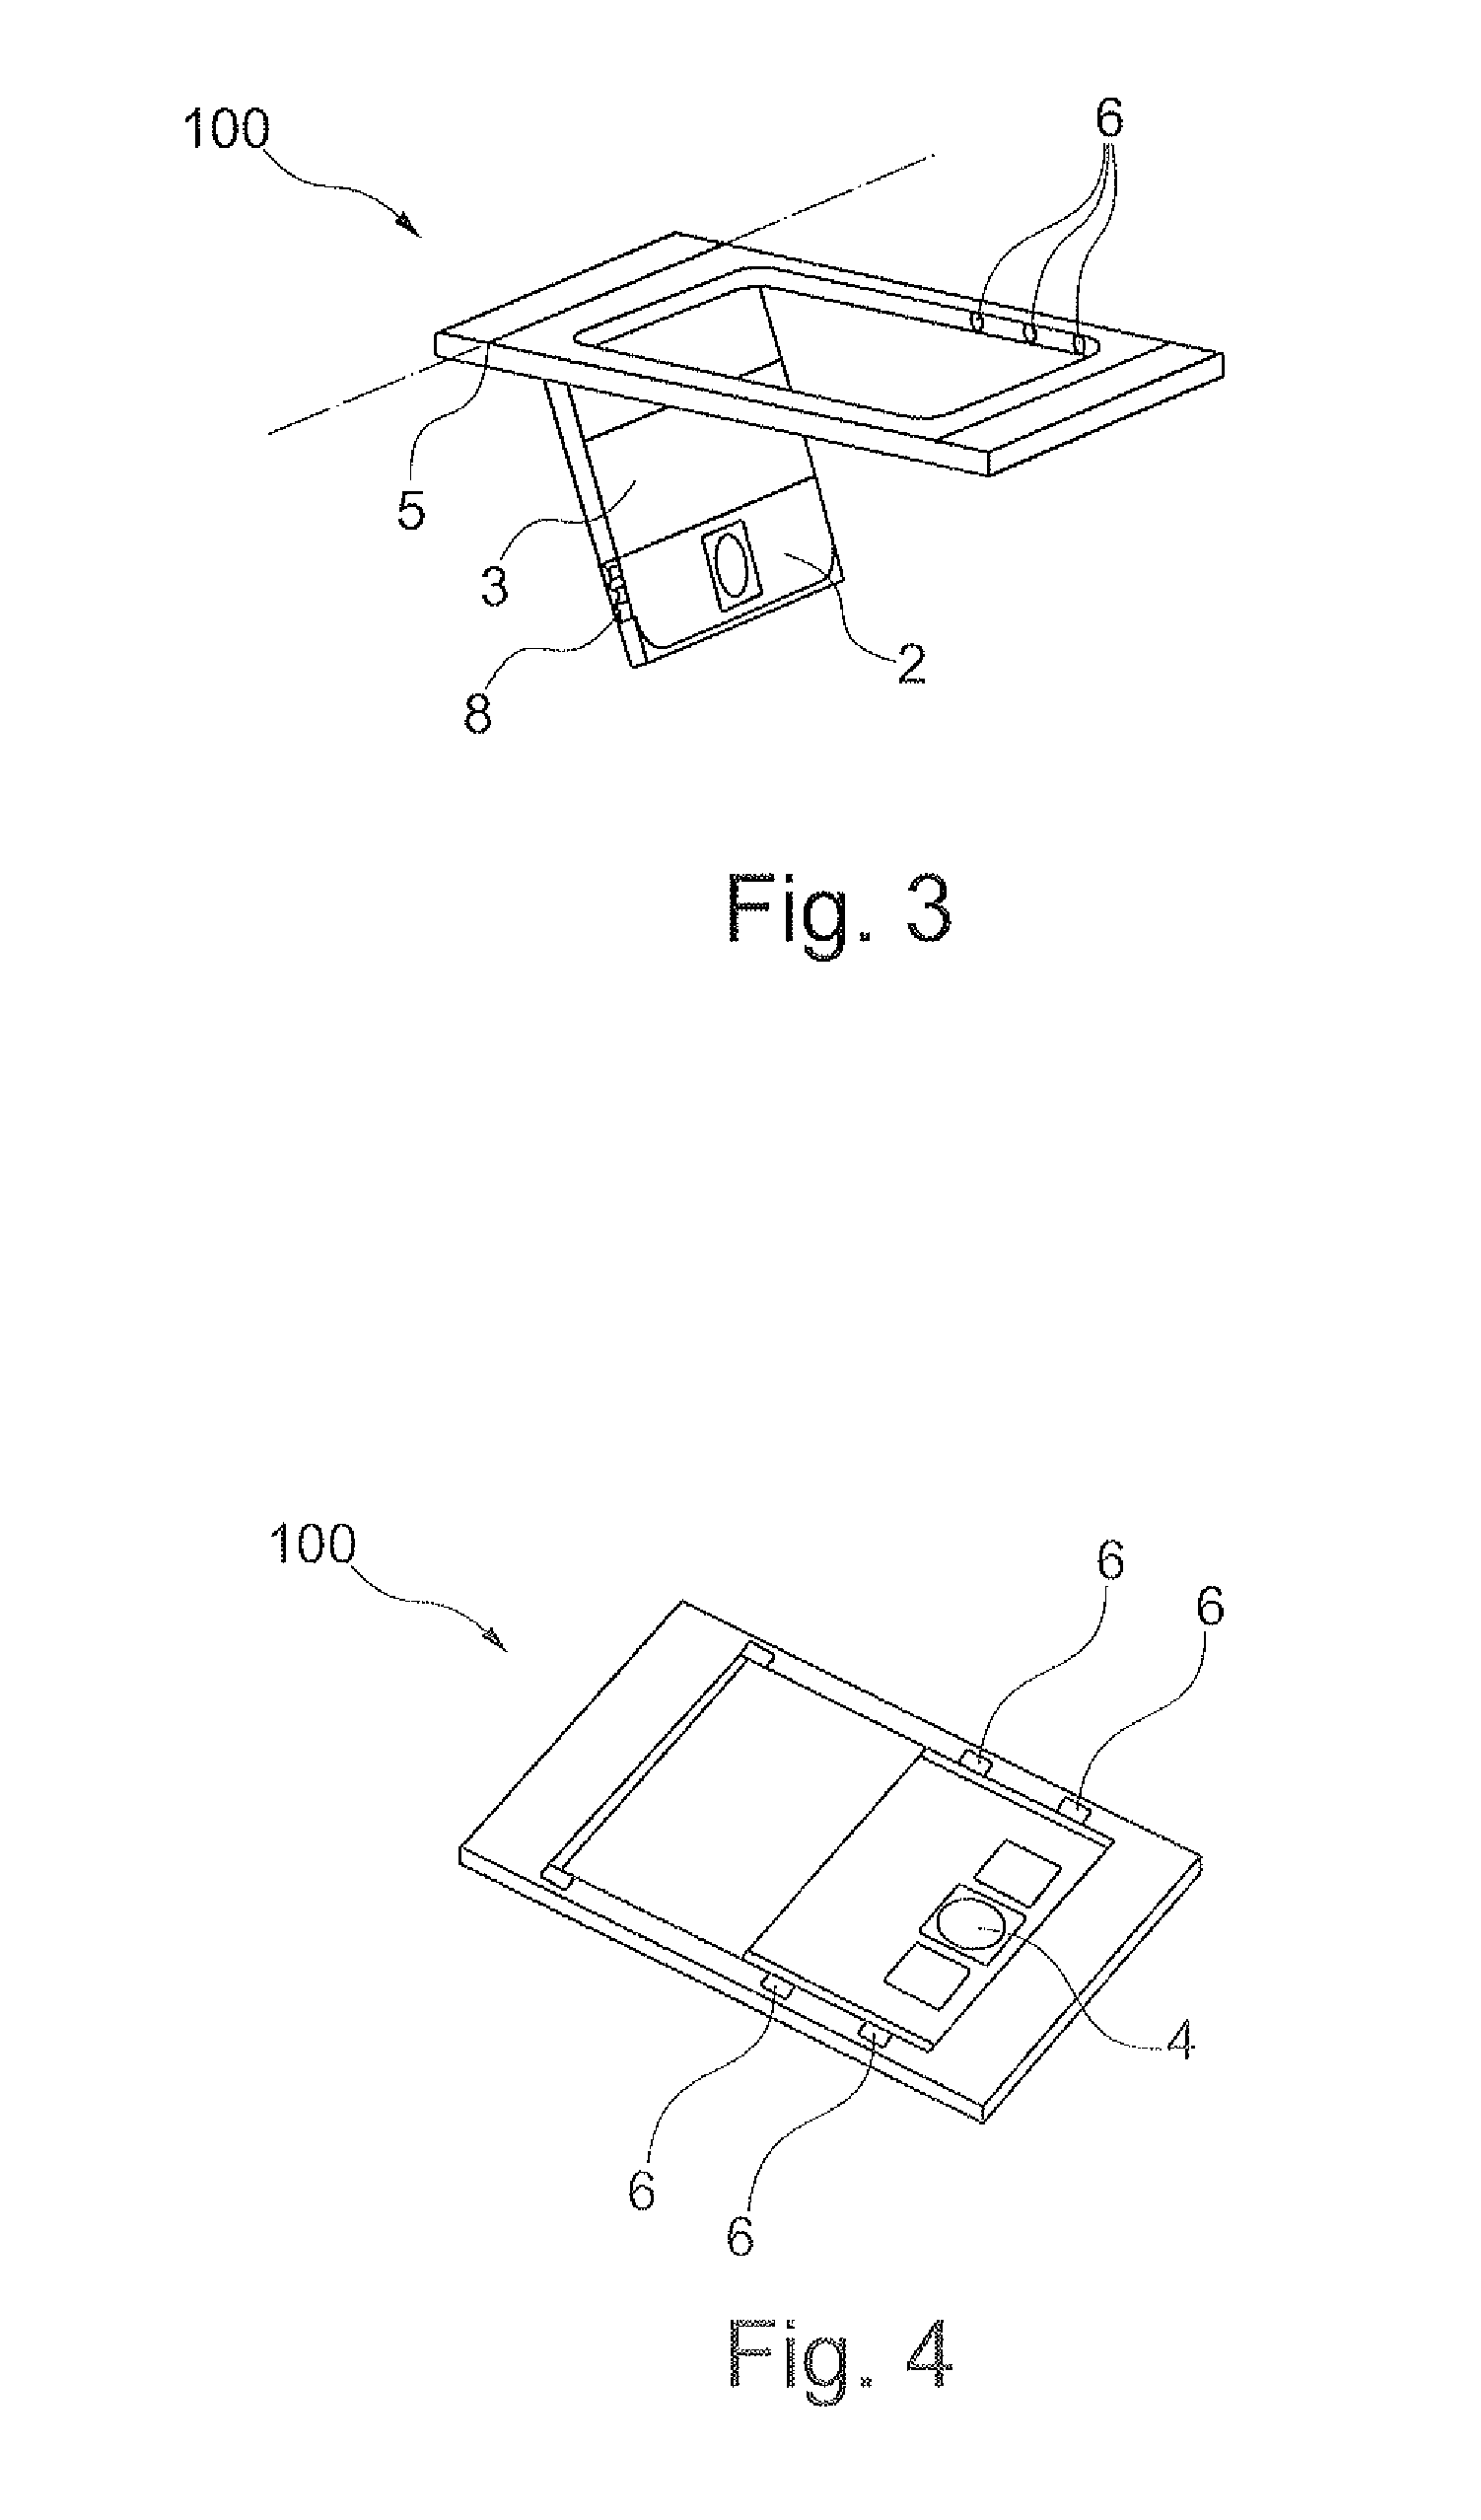 Emergency exit hatch for exiting a cabin module in an emergency and entering the same